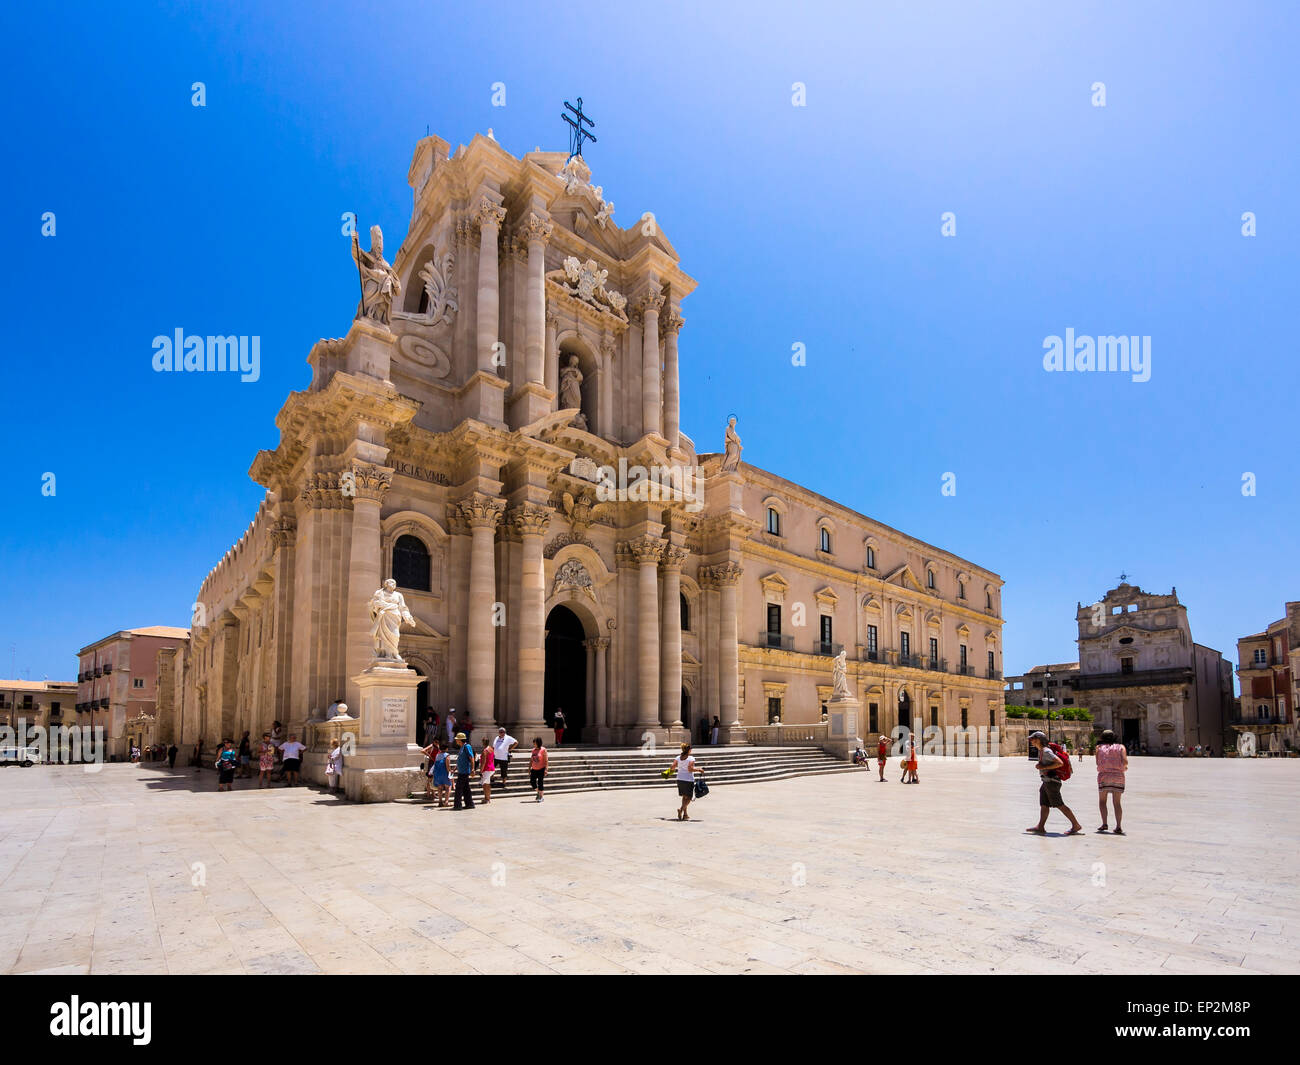 Italy, Sicily, Siracuse, Cathedral of Siracuse Stock Photo